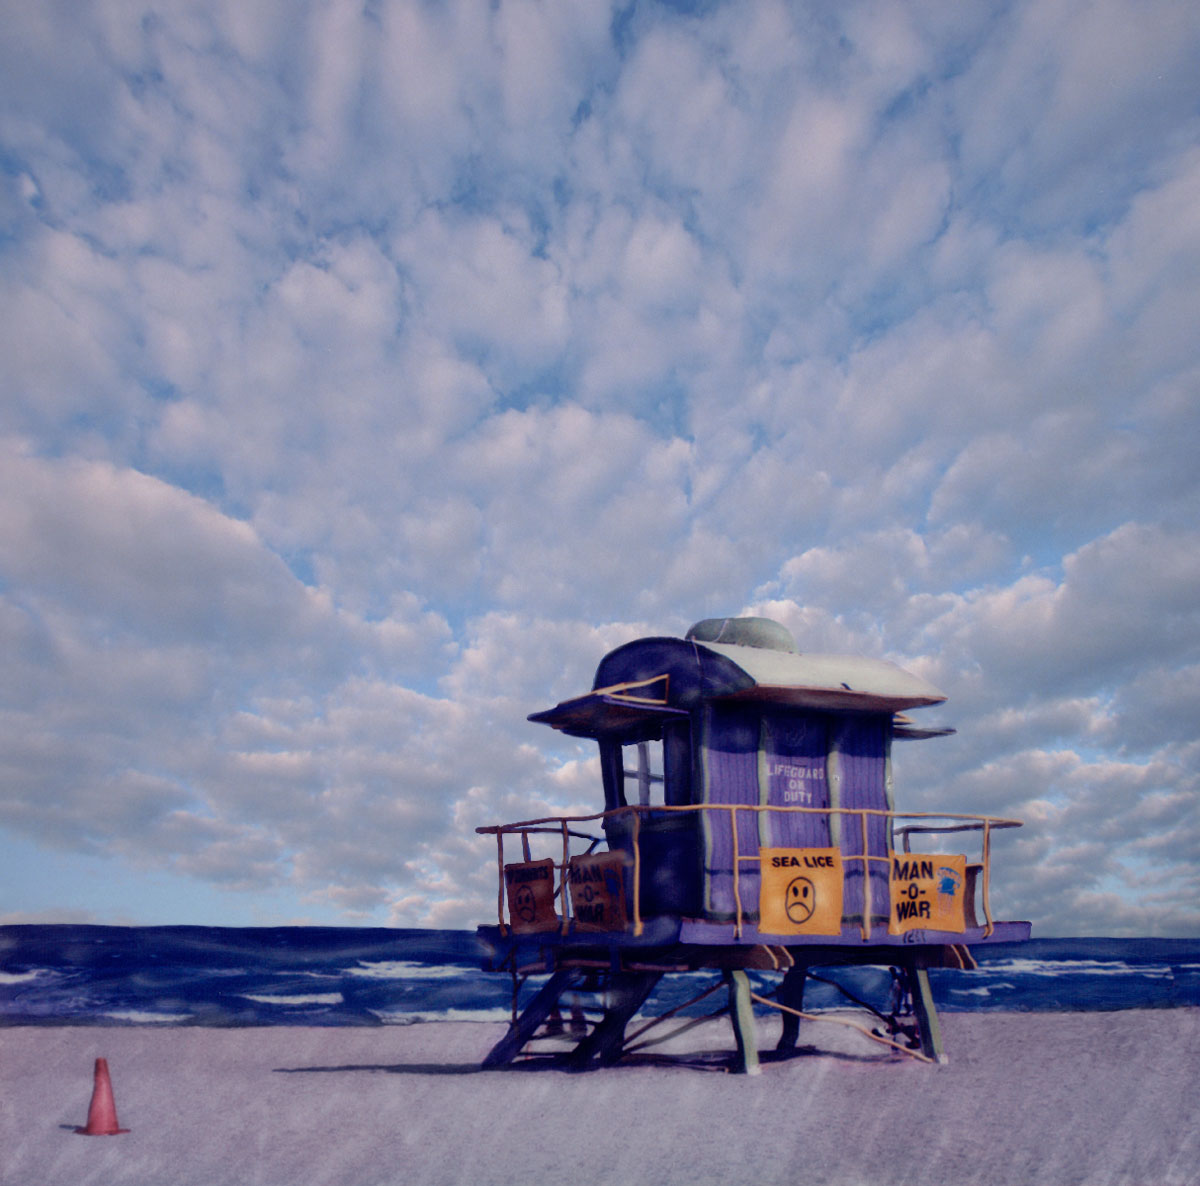 "Miami Beach Lifeguard Stand #10"<br> Seasape with Great Clouds in Sky